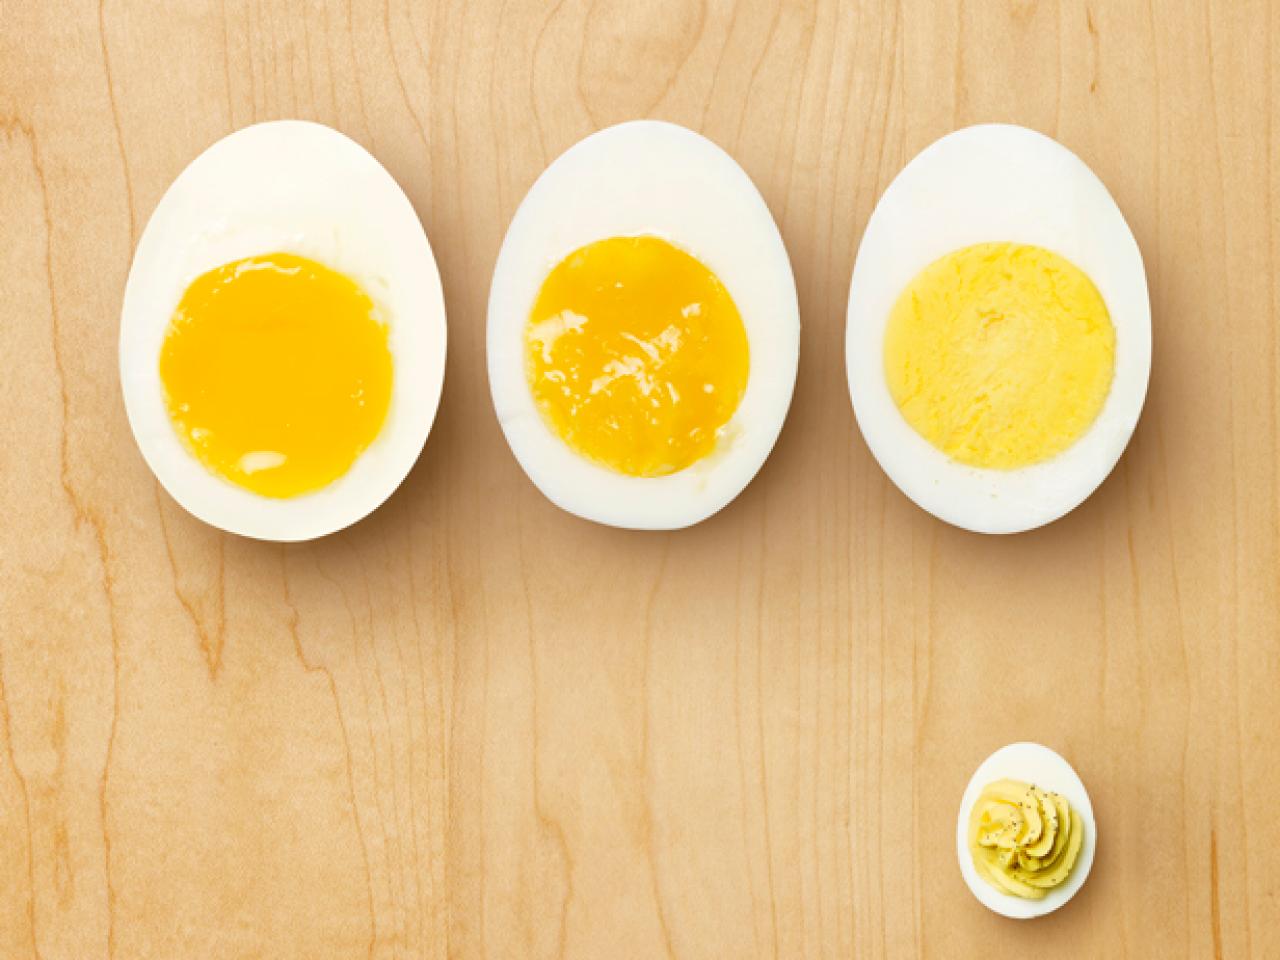 Hard Boiled Egg Photos and Images